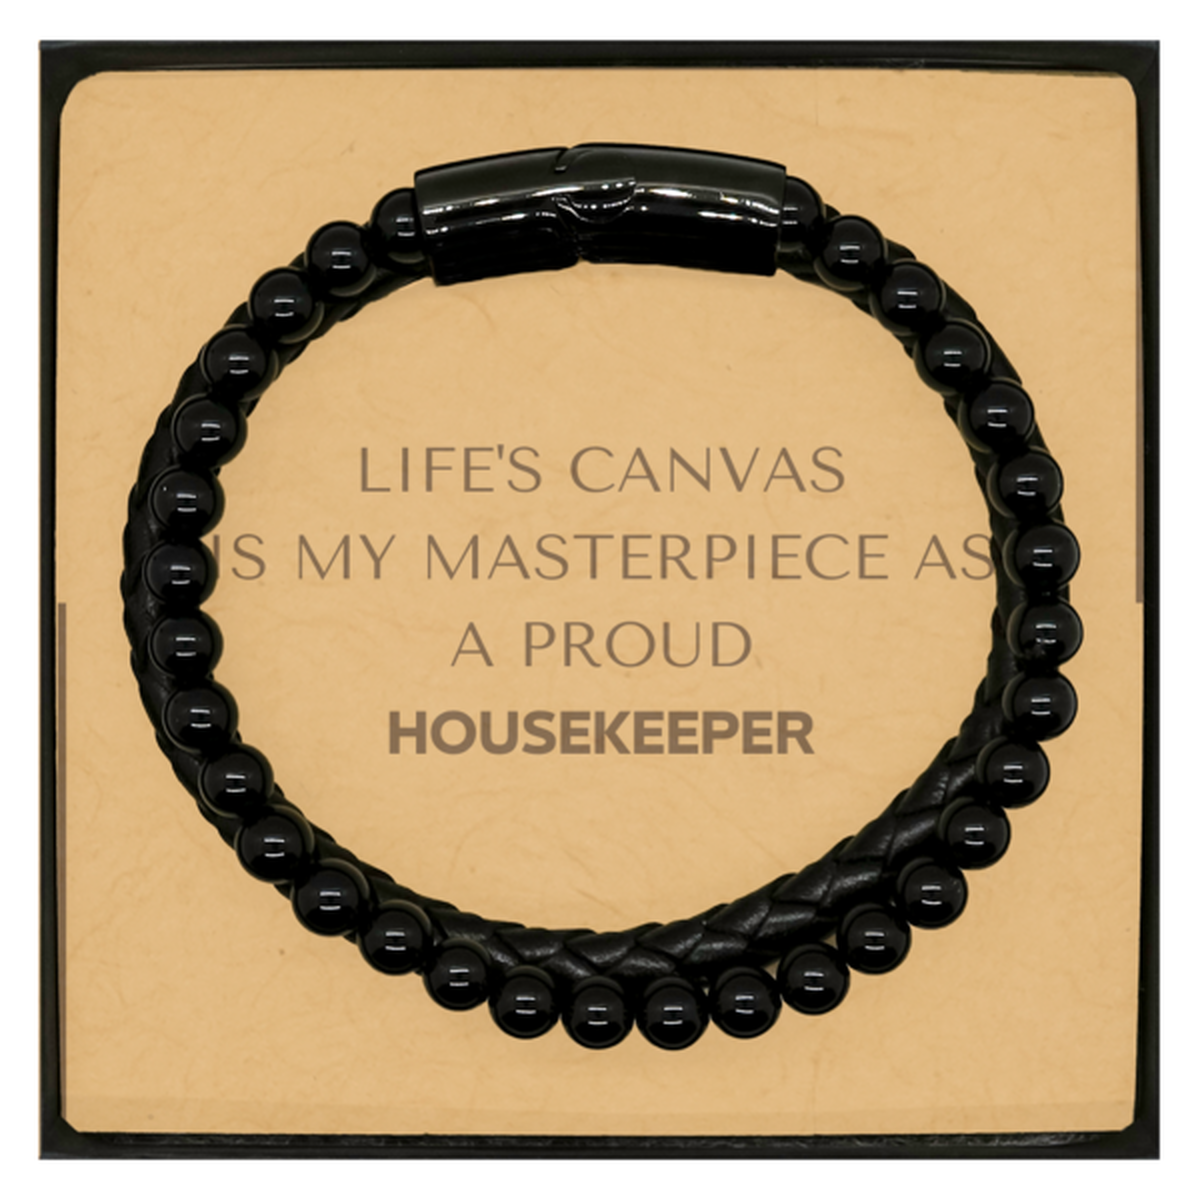 Proud Housekeeper Gifts, Life's canvas is my masterpiece, Epic Birthday Christmas Unique Stone Leather Bracelets For Housekeeper, Coworkers, Men, Women, Friends